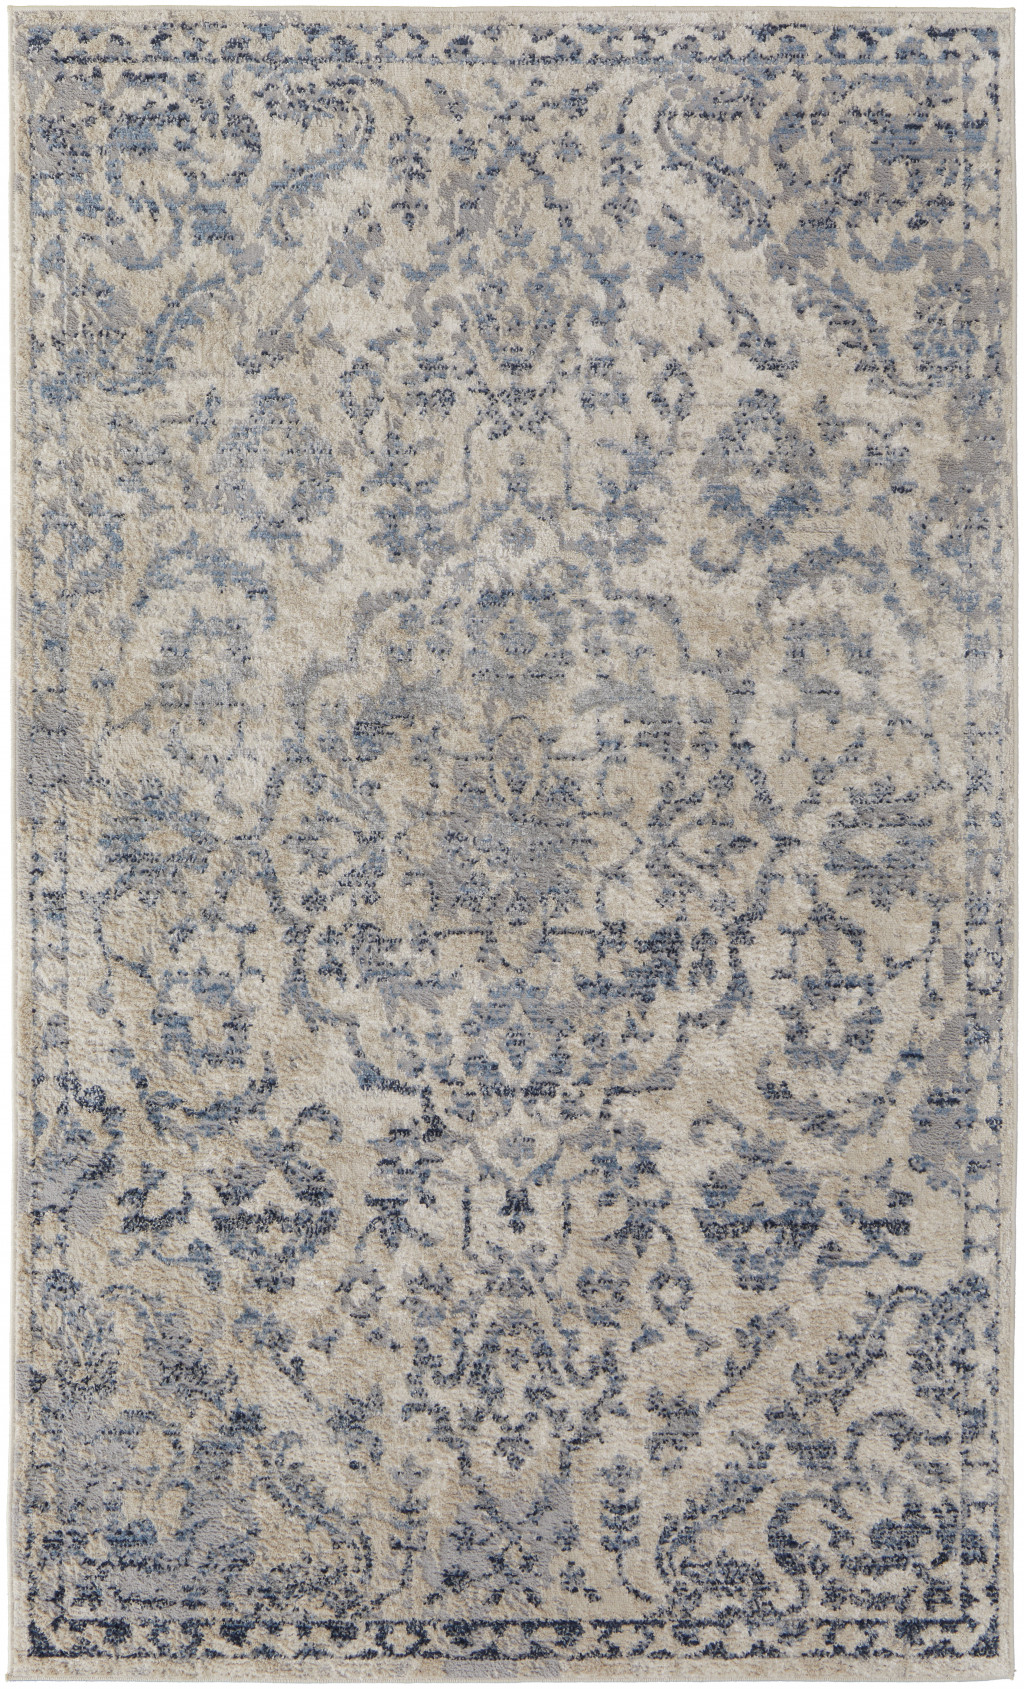 8' X 10' Blue Gray And Ivory Floral Power Loom Distressed Area Rug-513283-1